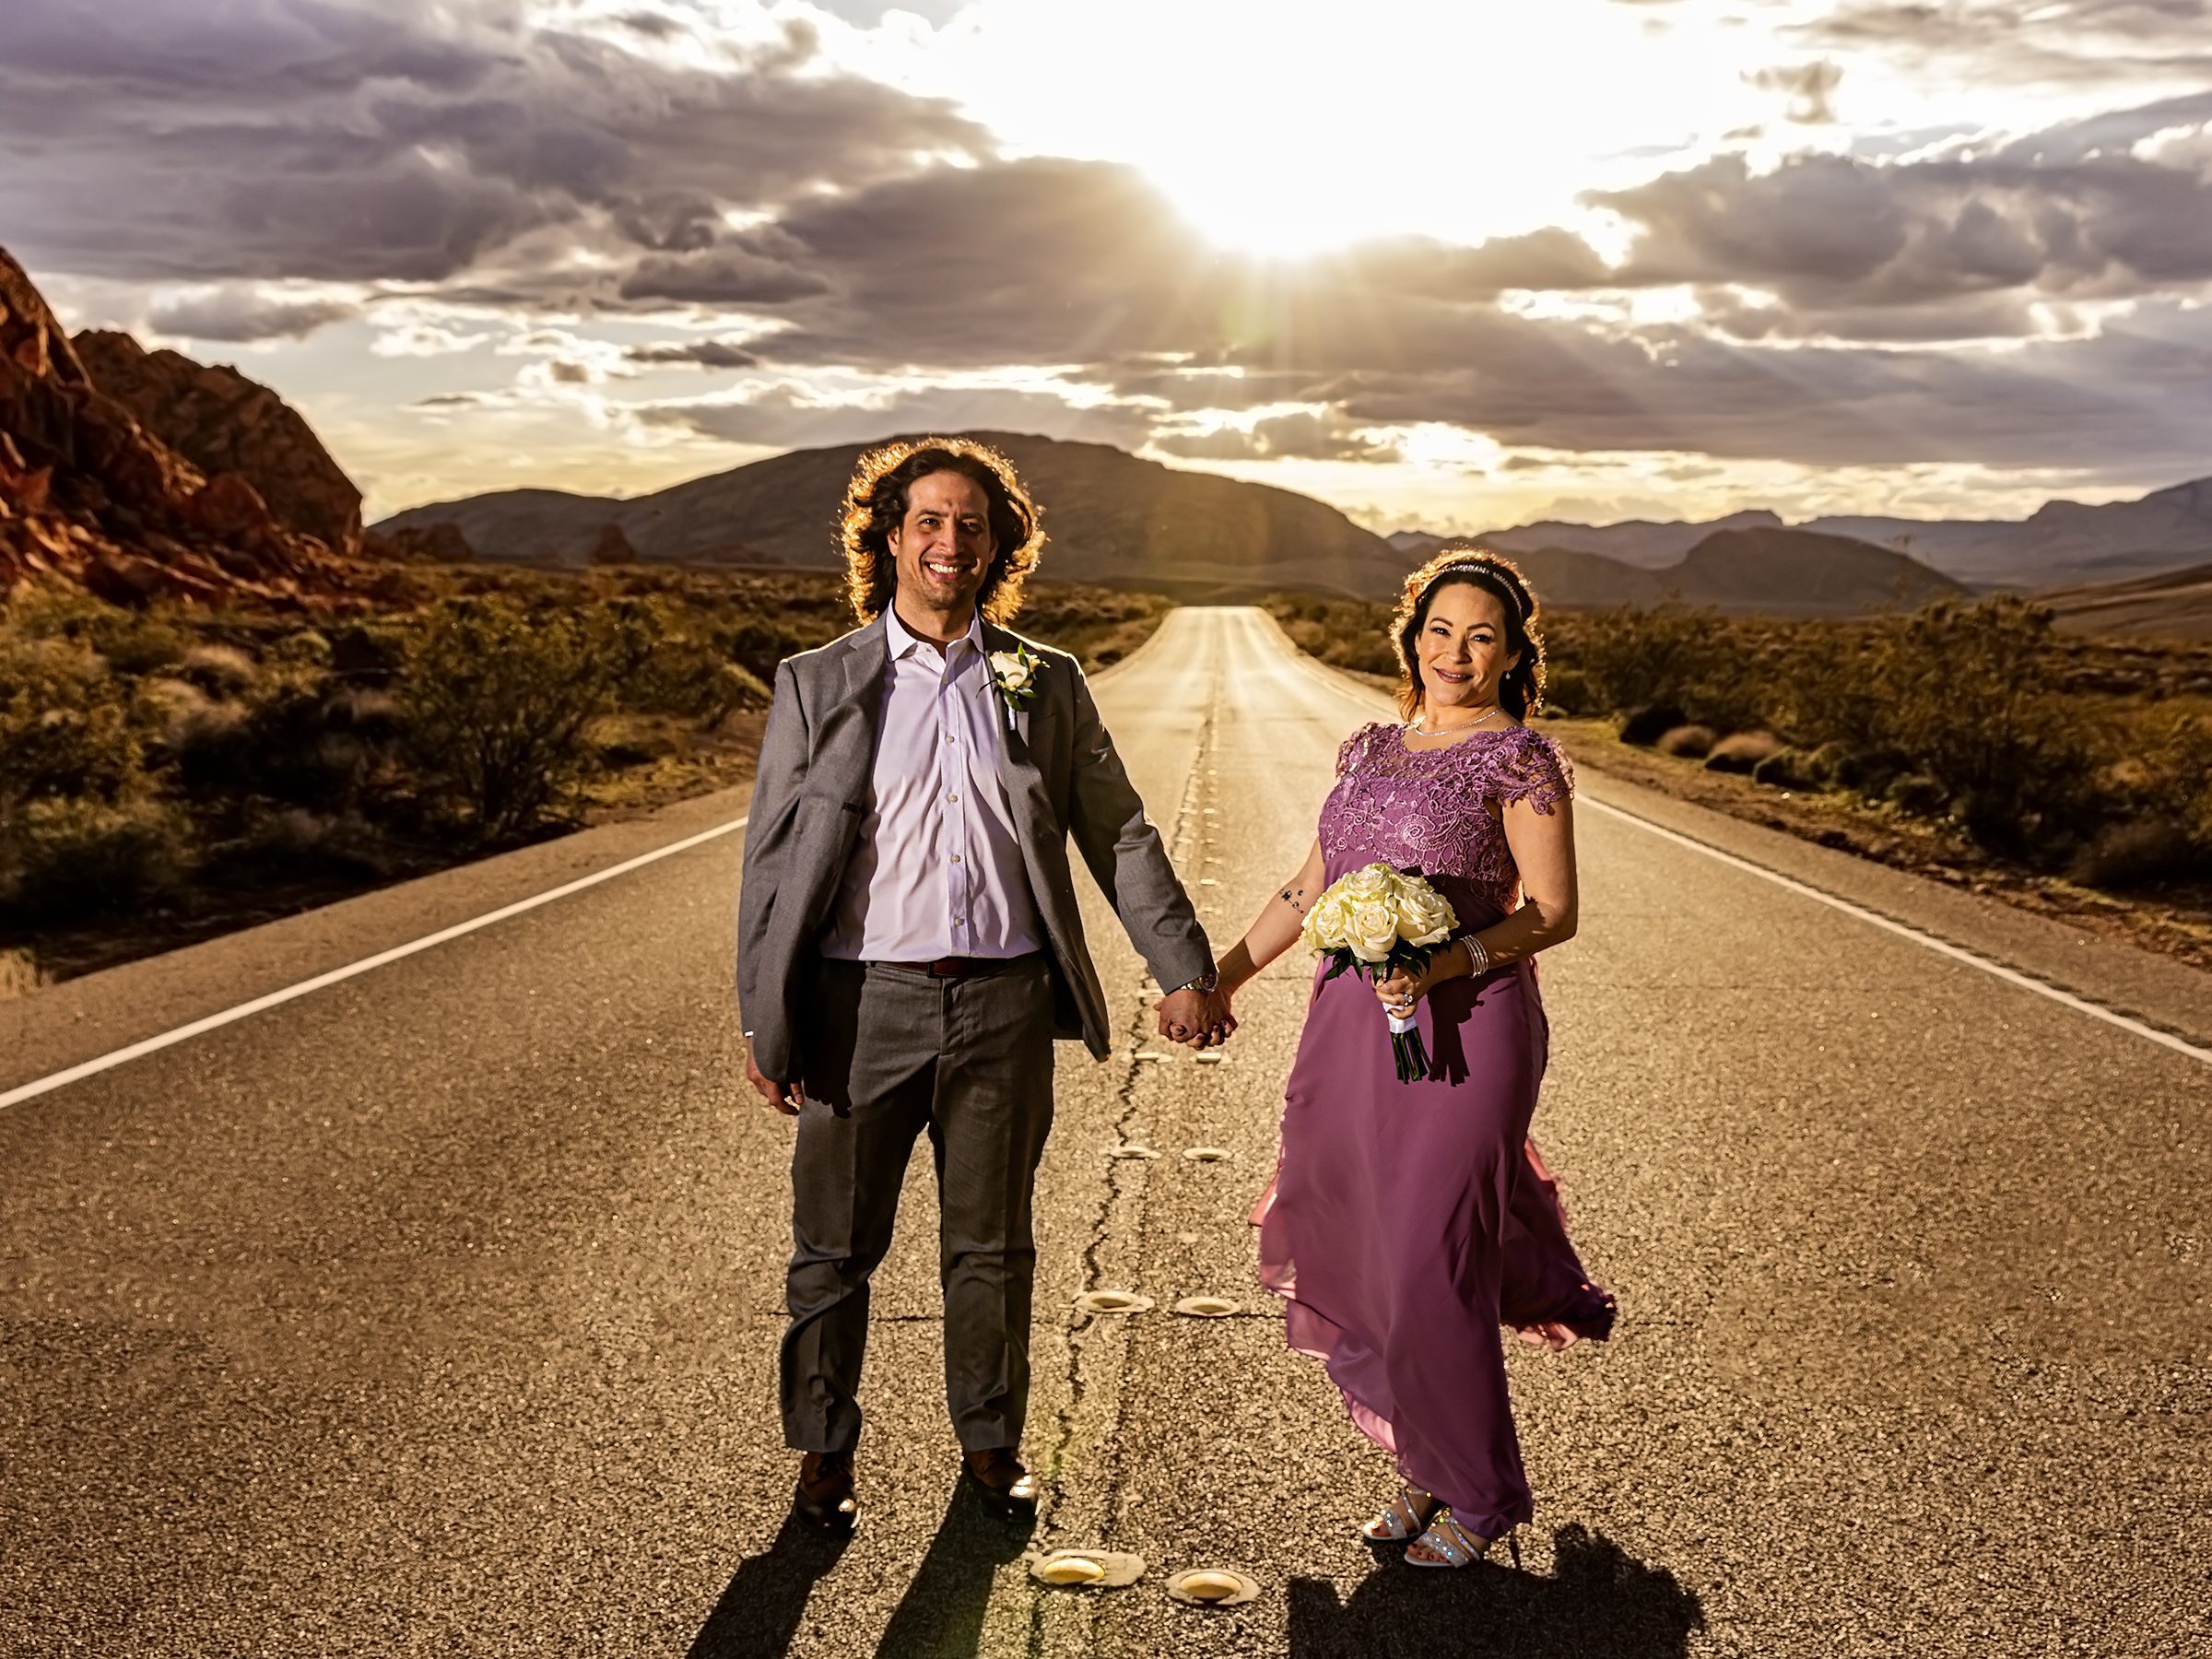 A couple elopes, holding hands on a desert road in the Valley of Fire.